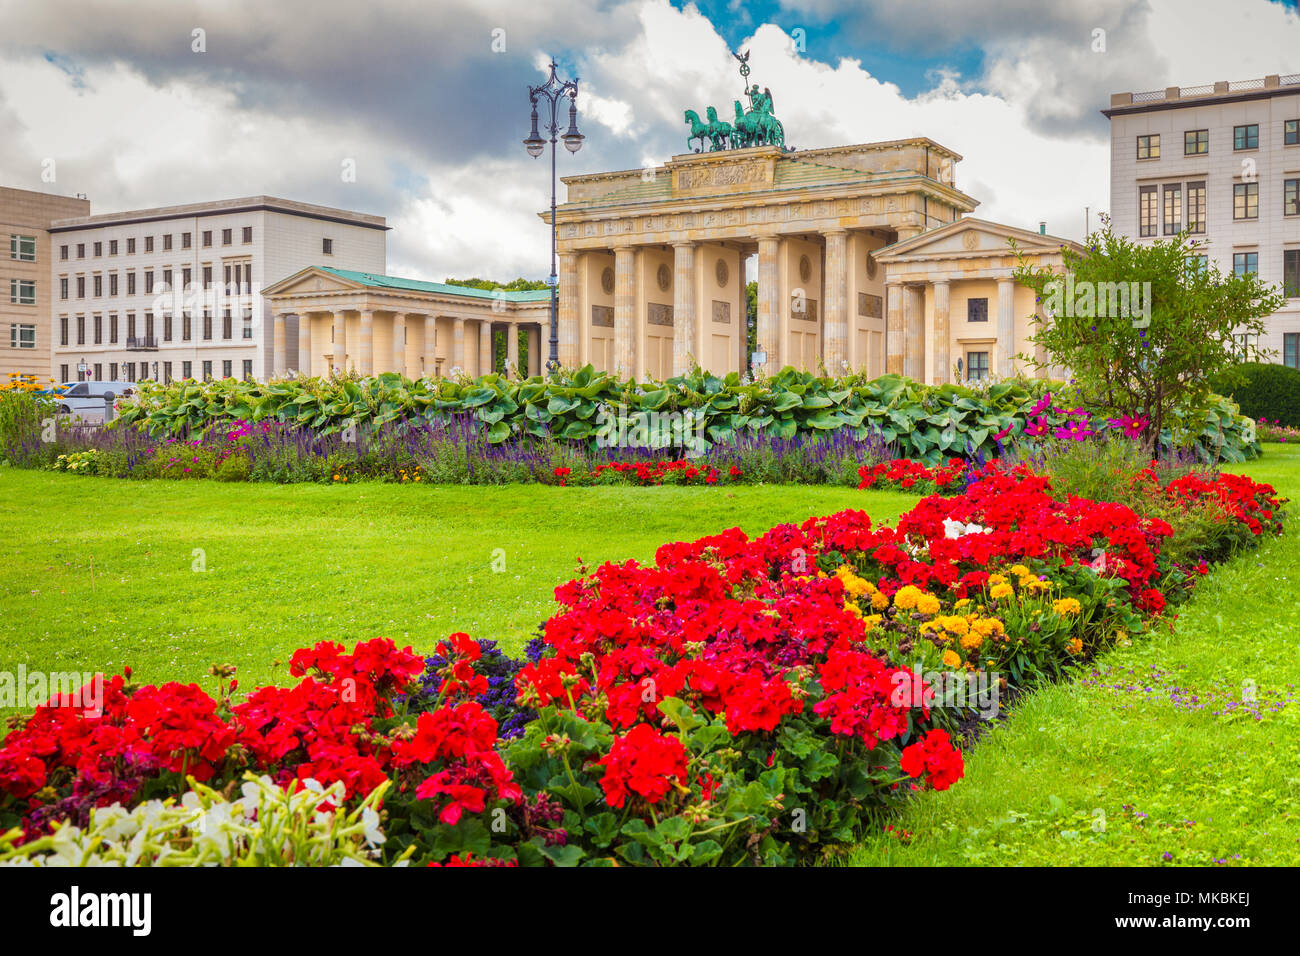 Classic view of famous Brandenburg Gate at Pariser Platz, one of the best-known landmarks and national symbols of Germany, on a beautiful sunny day in Stock Photo